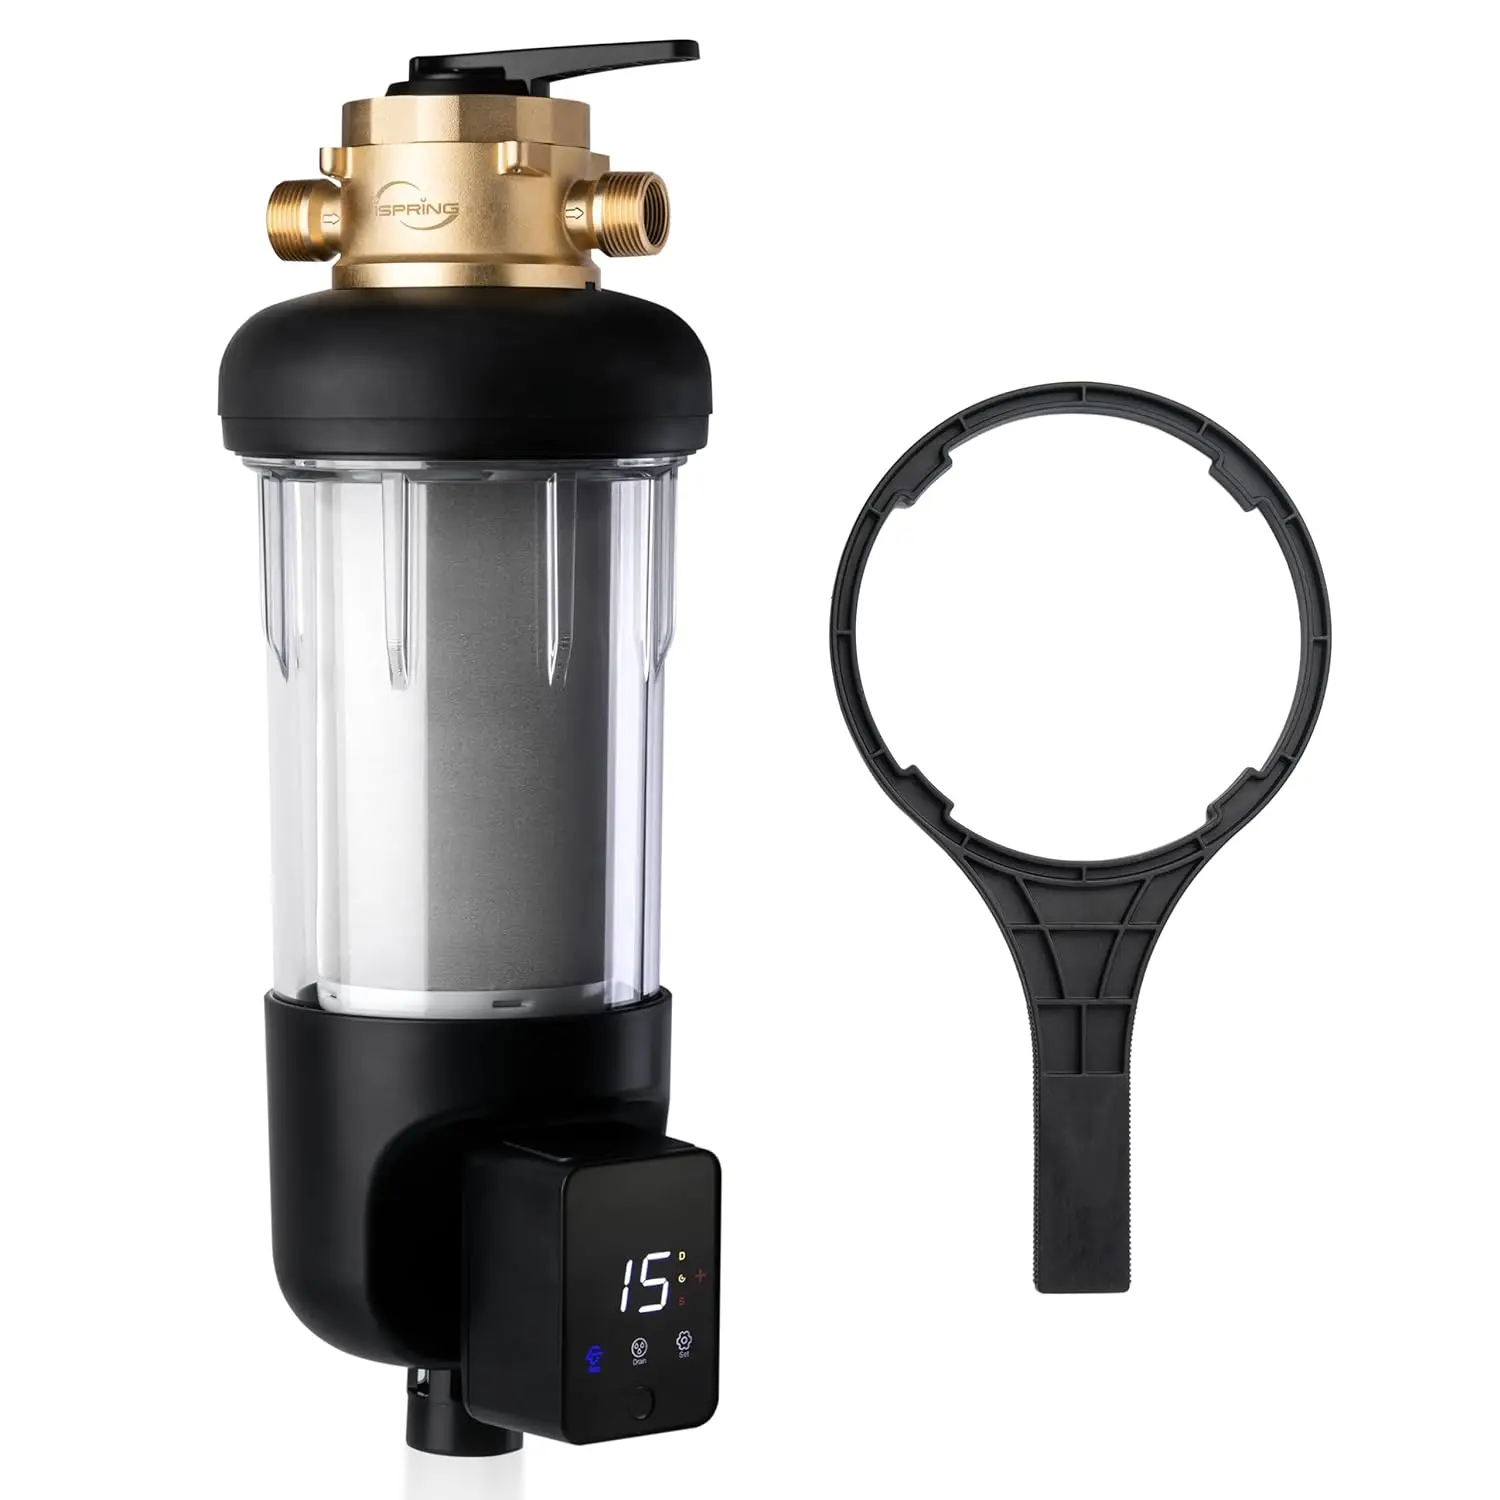 

iSpring WSP50ARJ-BP Whole House Prefilter, Spin-Down Sediment Water with Bypass, Upgraded Clear Housing, Jumbo Size